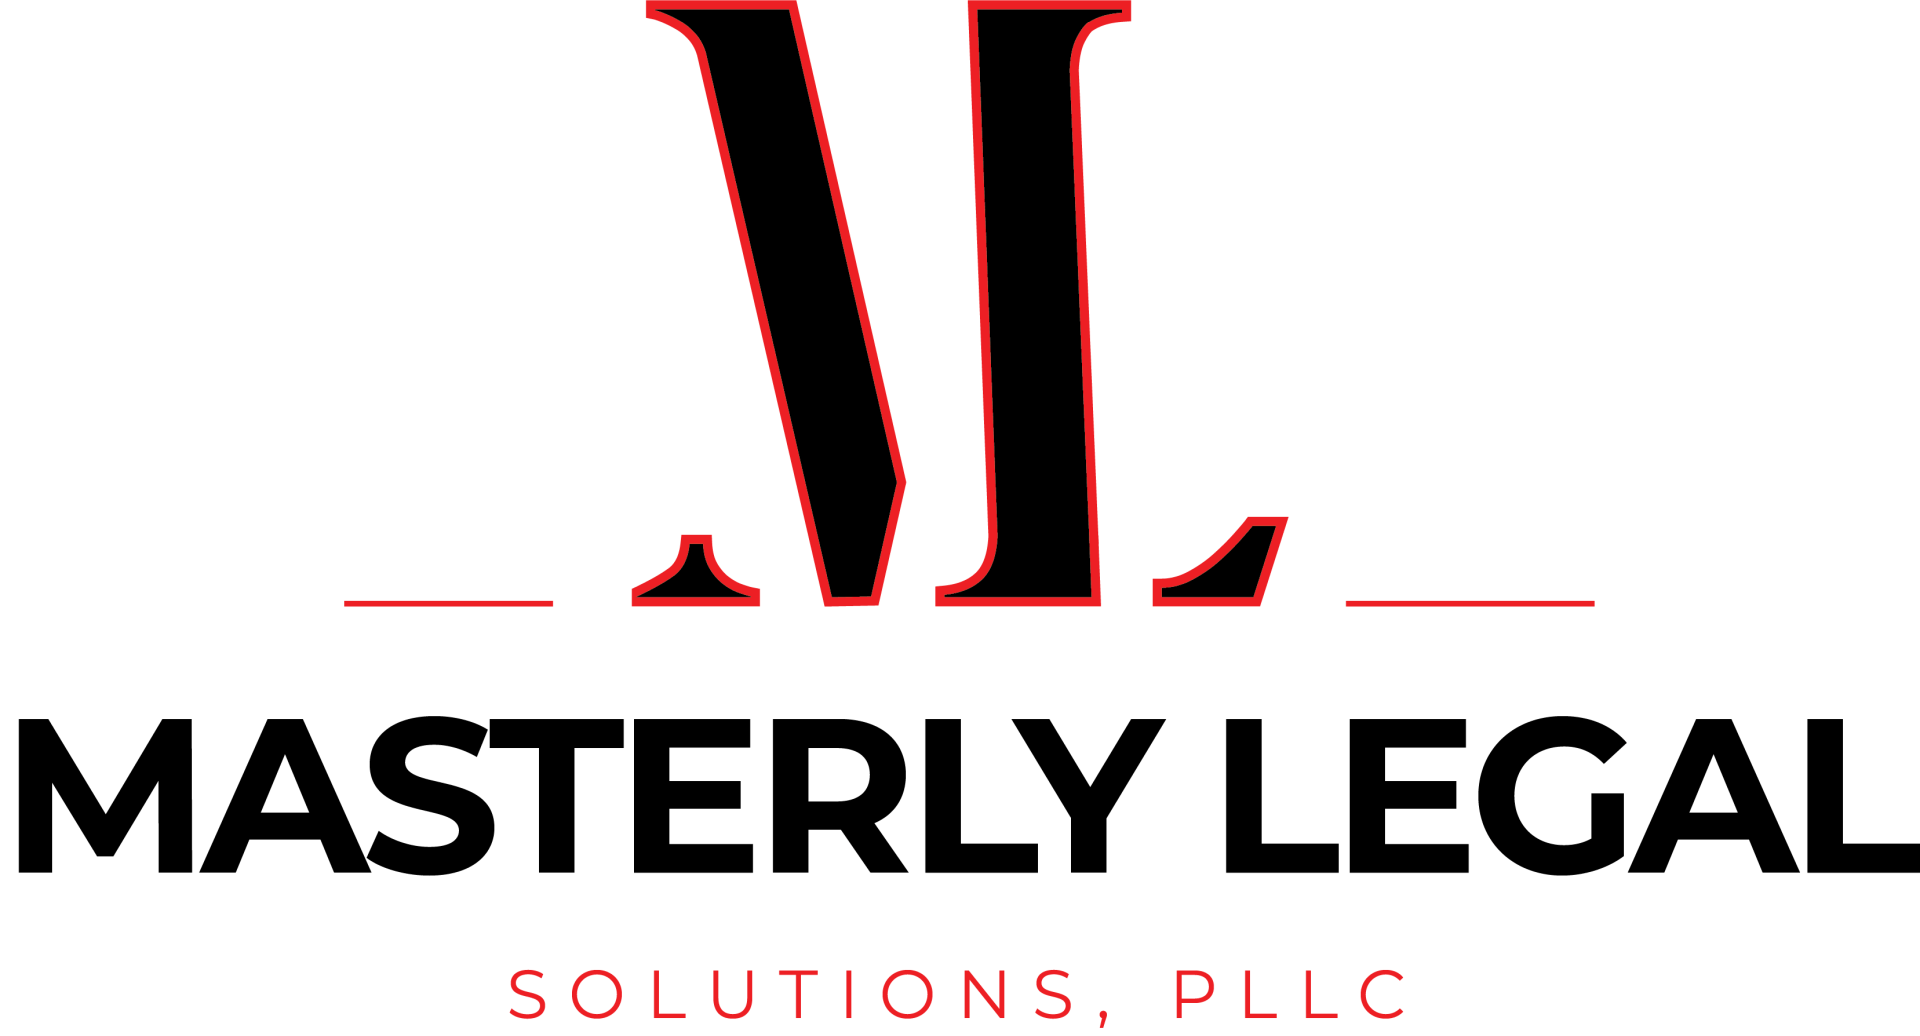 A logo for a law firm called masterly legal solutions , pllc.